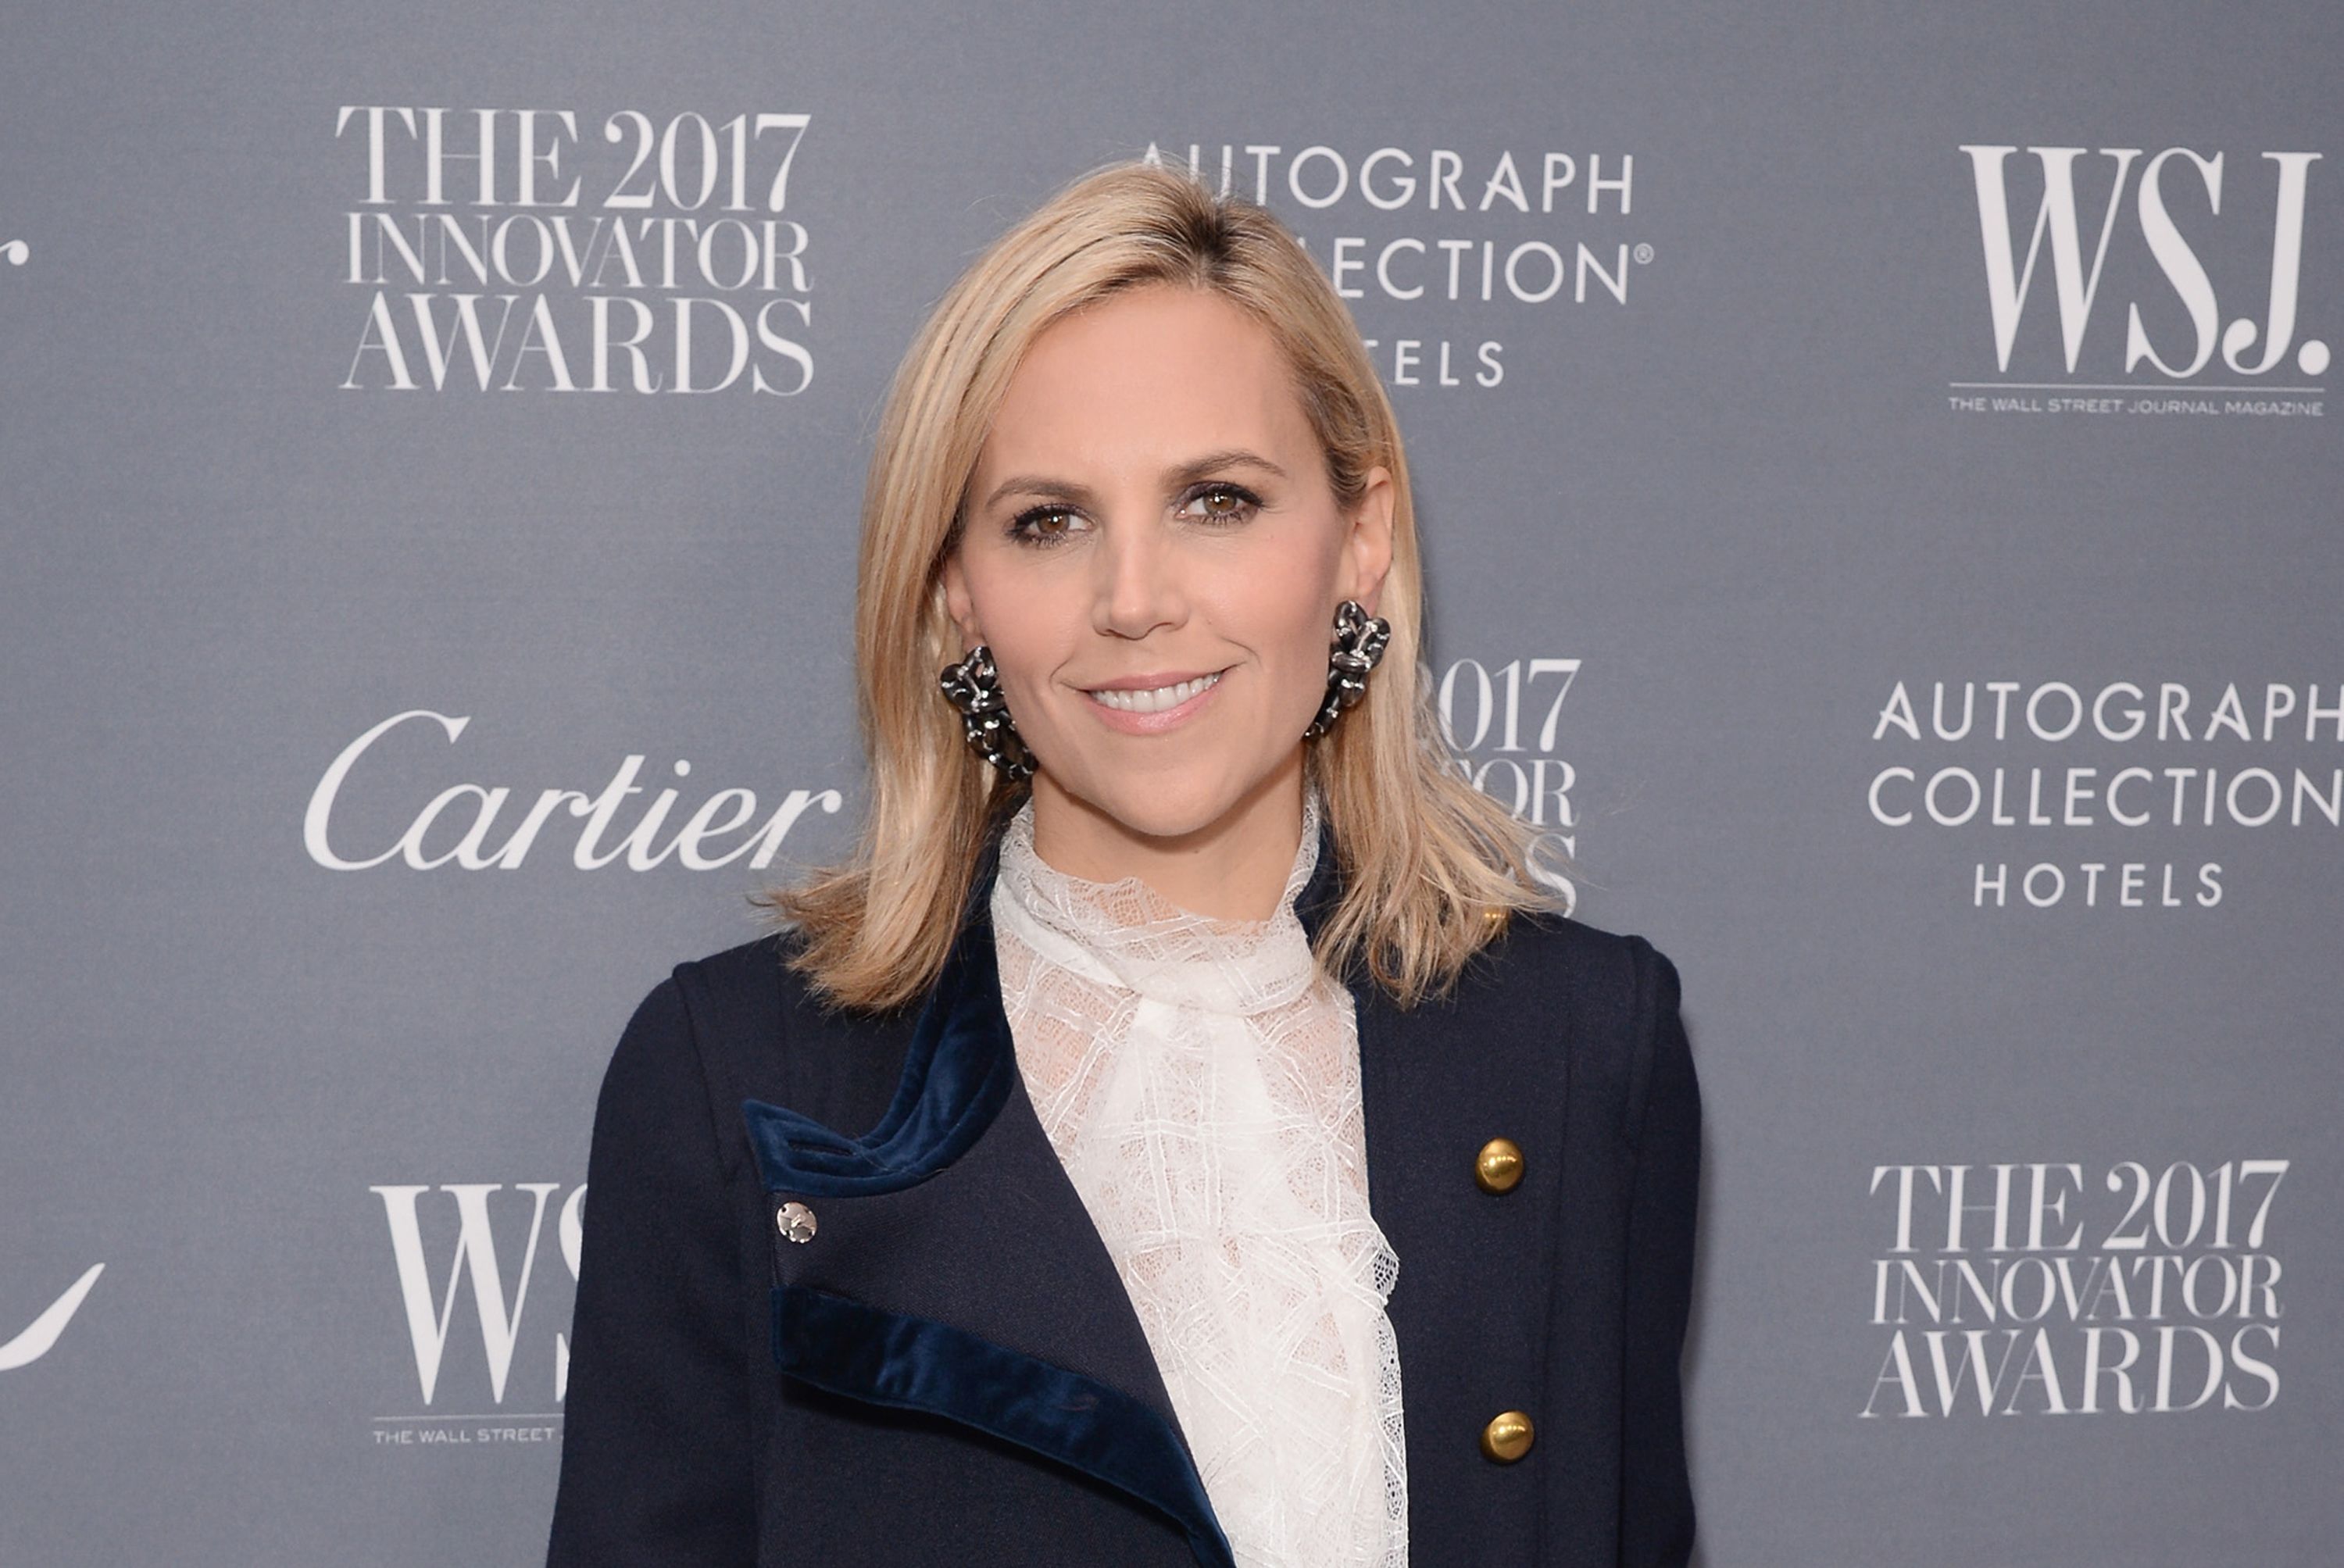 Tory Burch: 'Businesses can do well by doing good